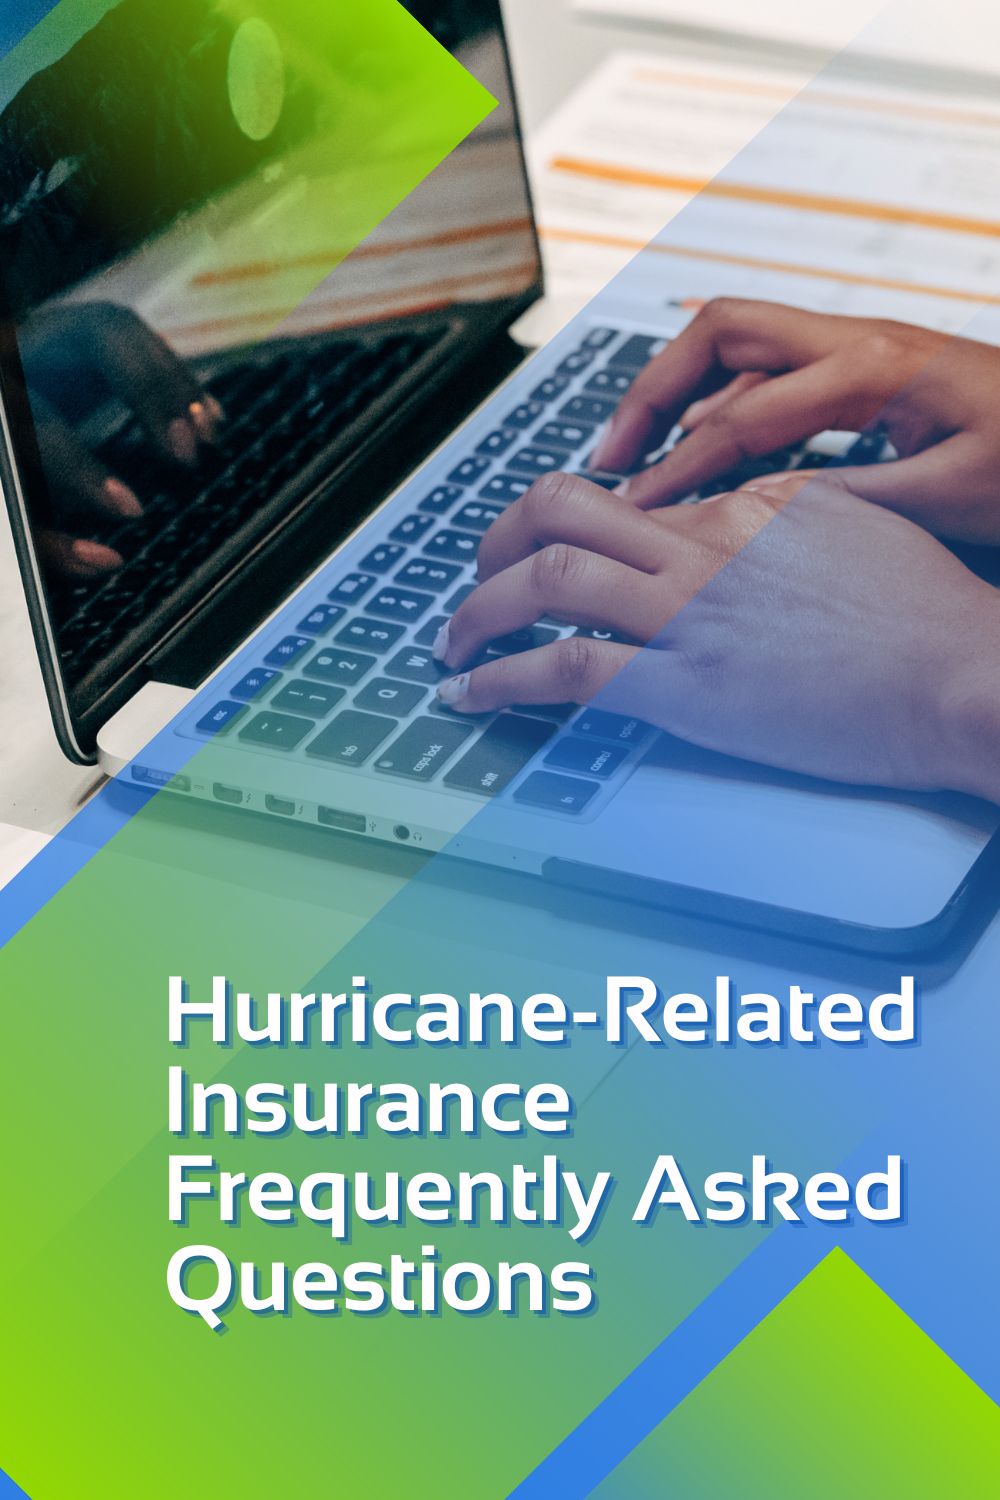 Hurricane-Related Insurance Frequently Asked Questions